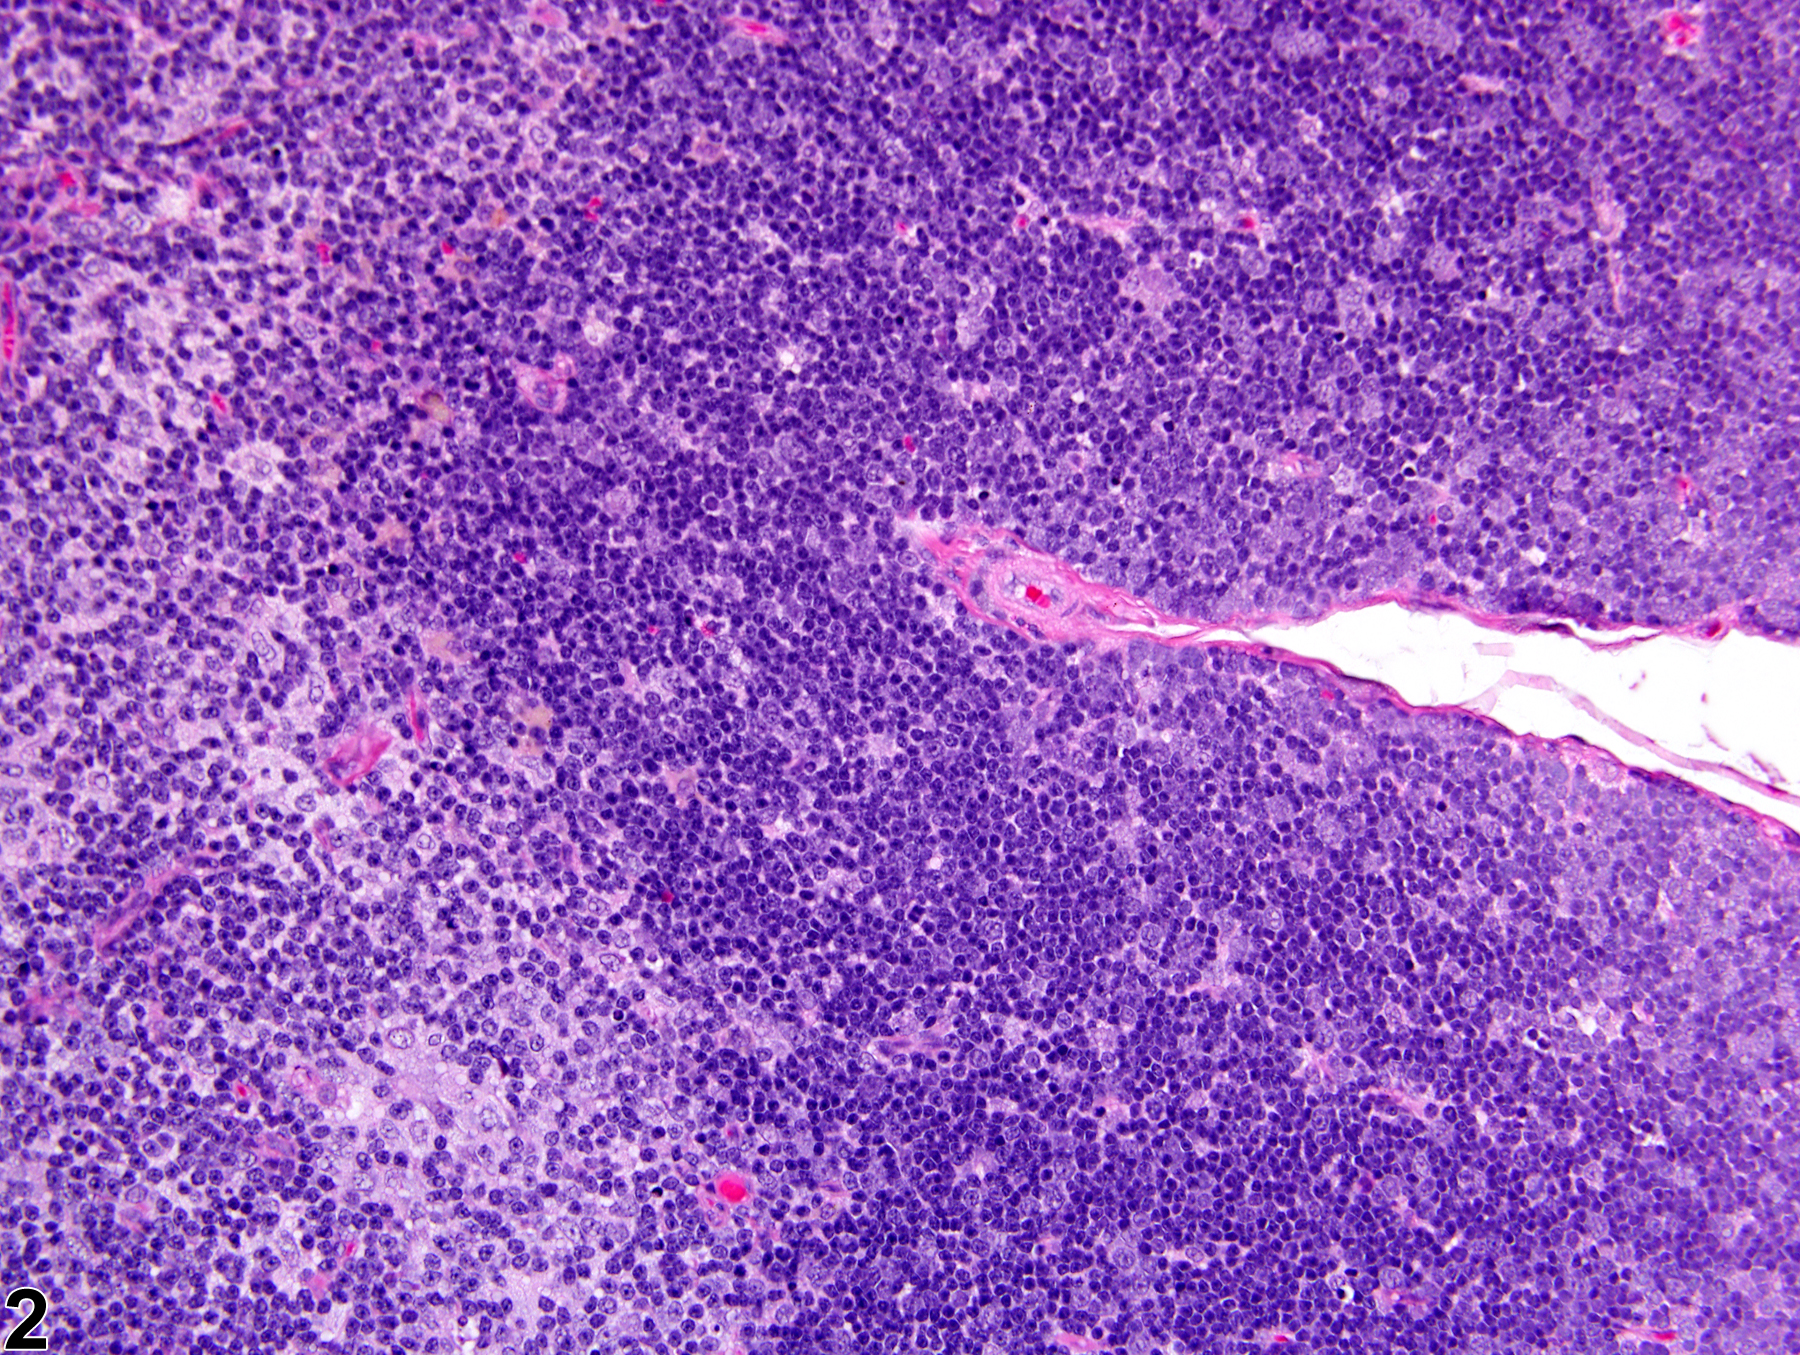 Image of atrophy in the thymus from a male Harlan Sprague-Dawley rat in a subchronic study